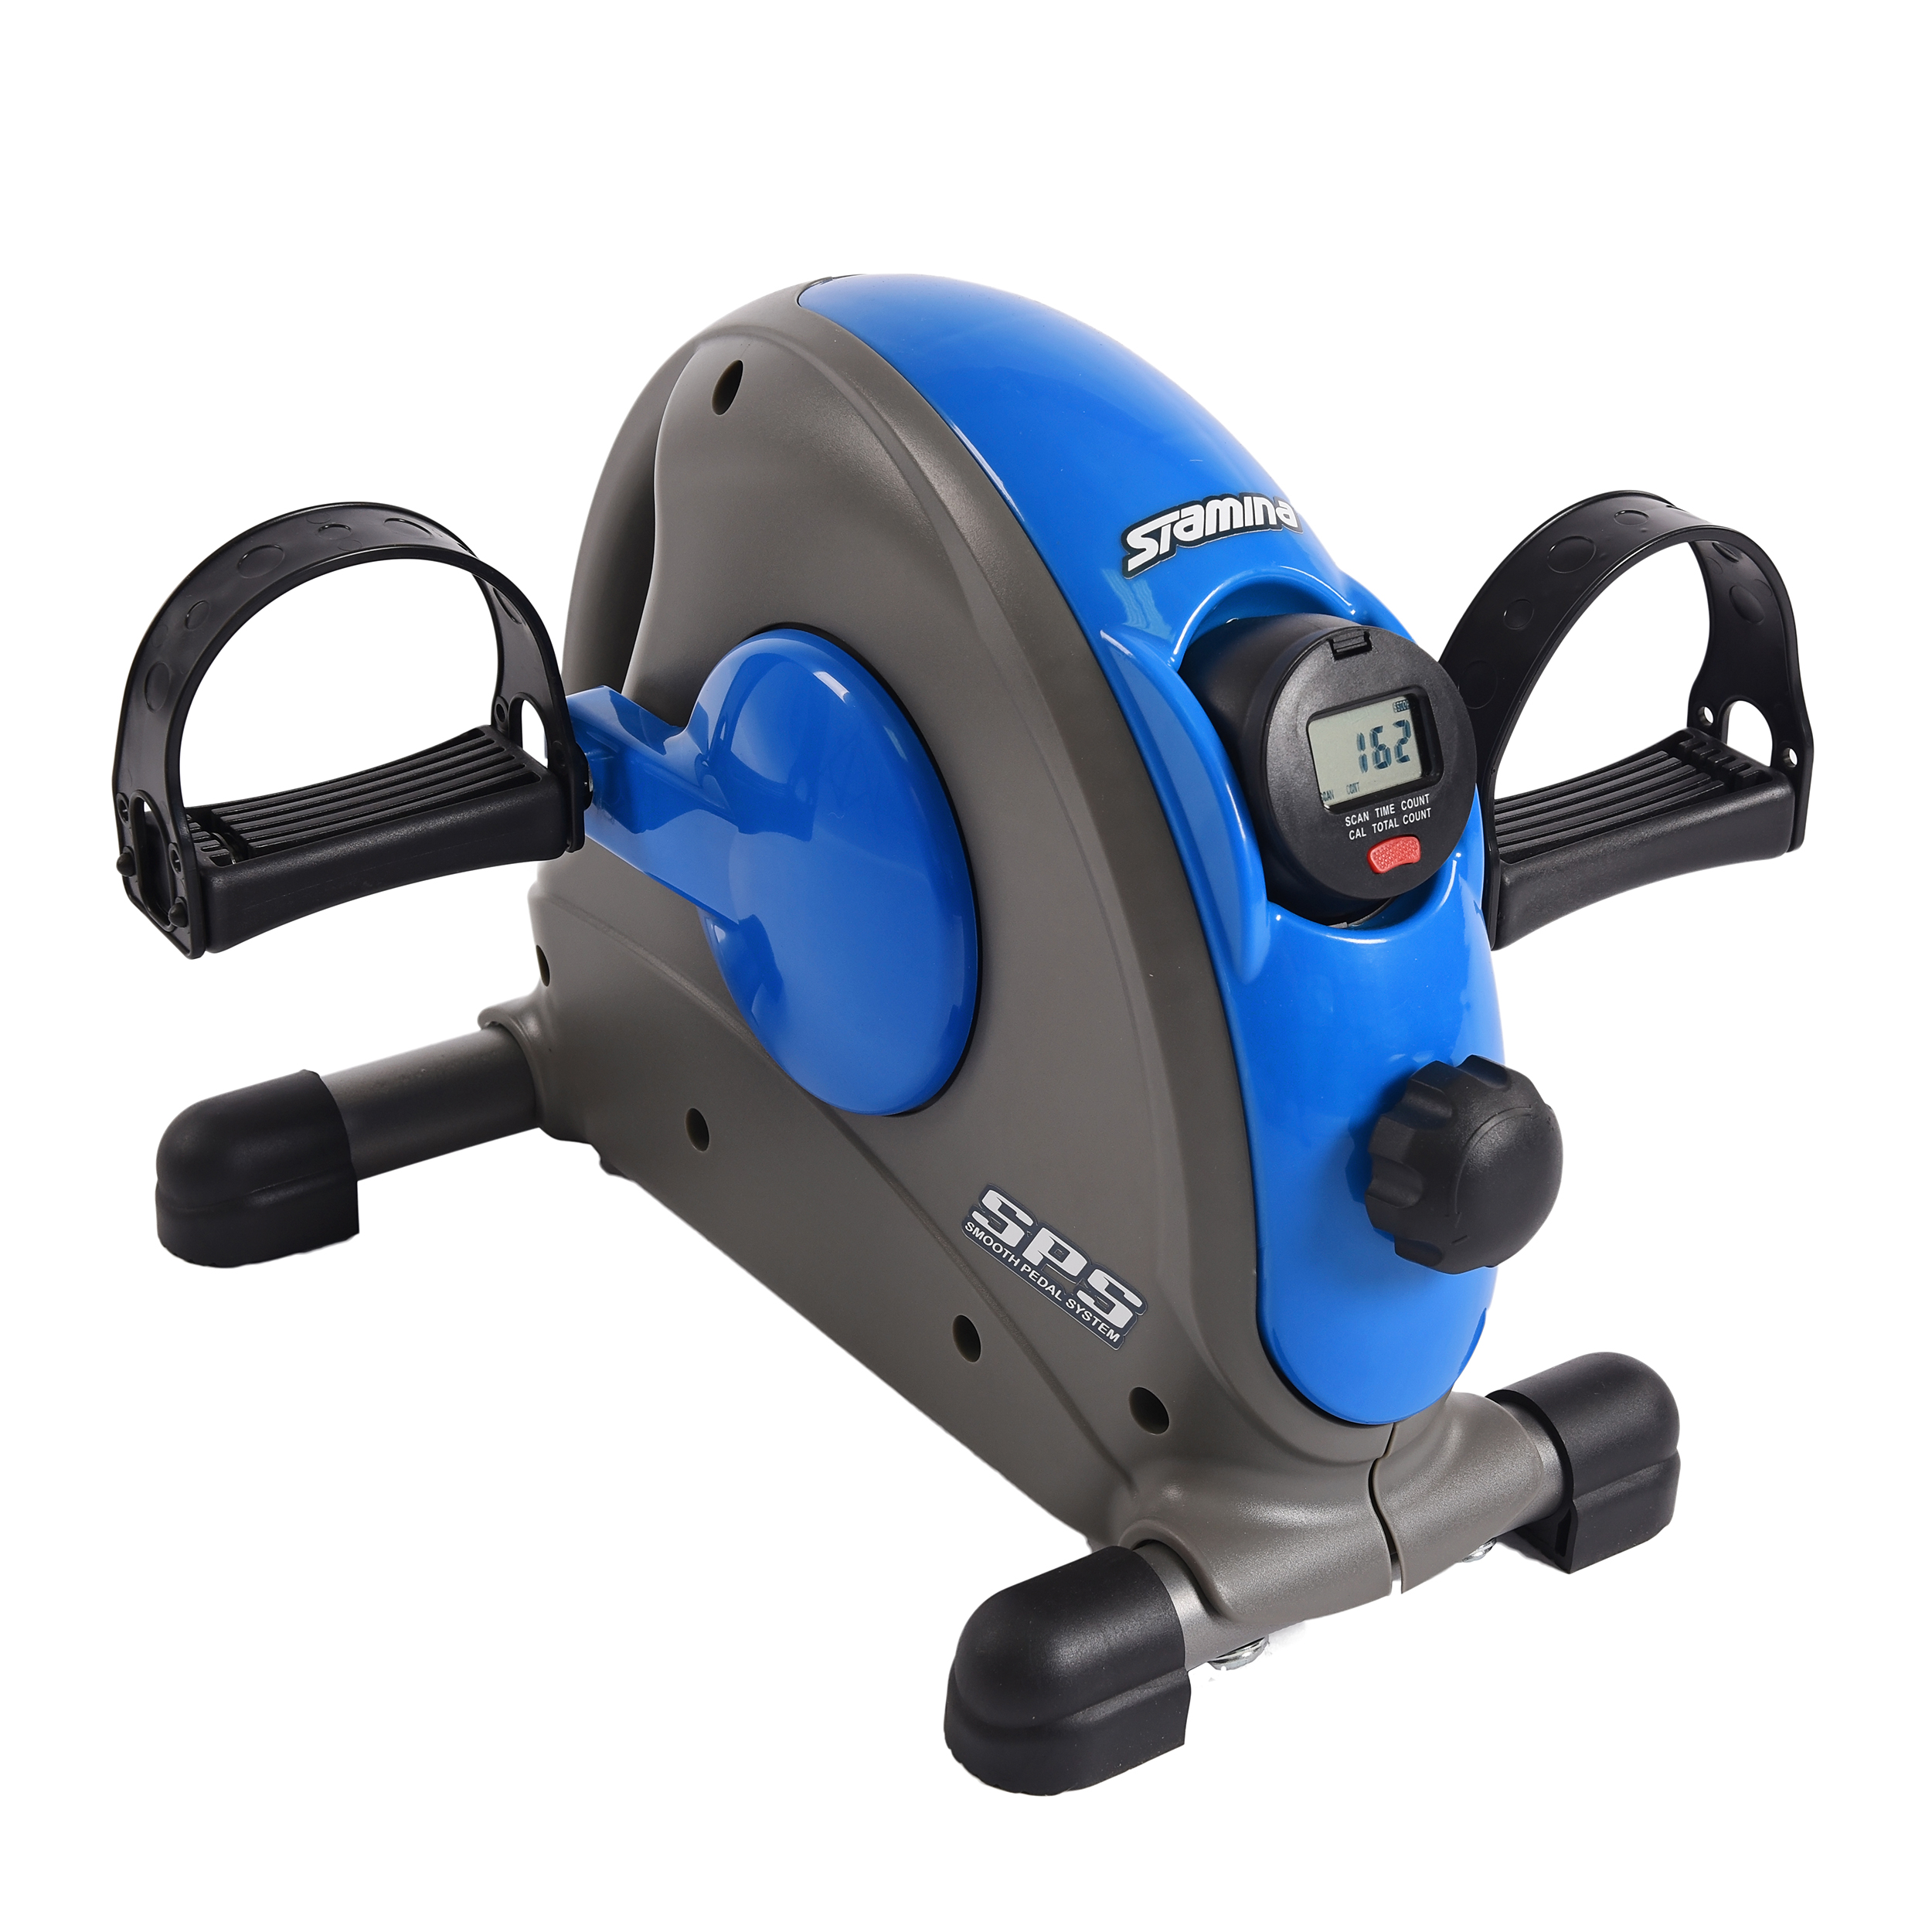 Stamina Mini Exercise Bike with Smooth Pedal System - Blue